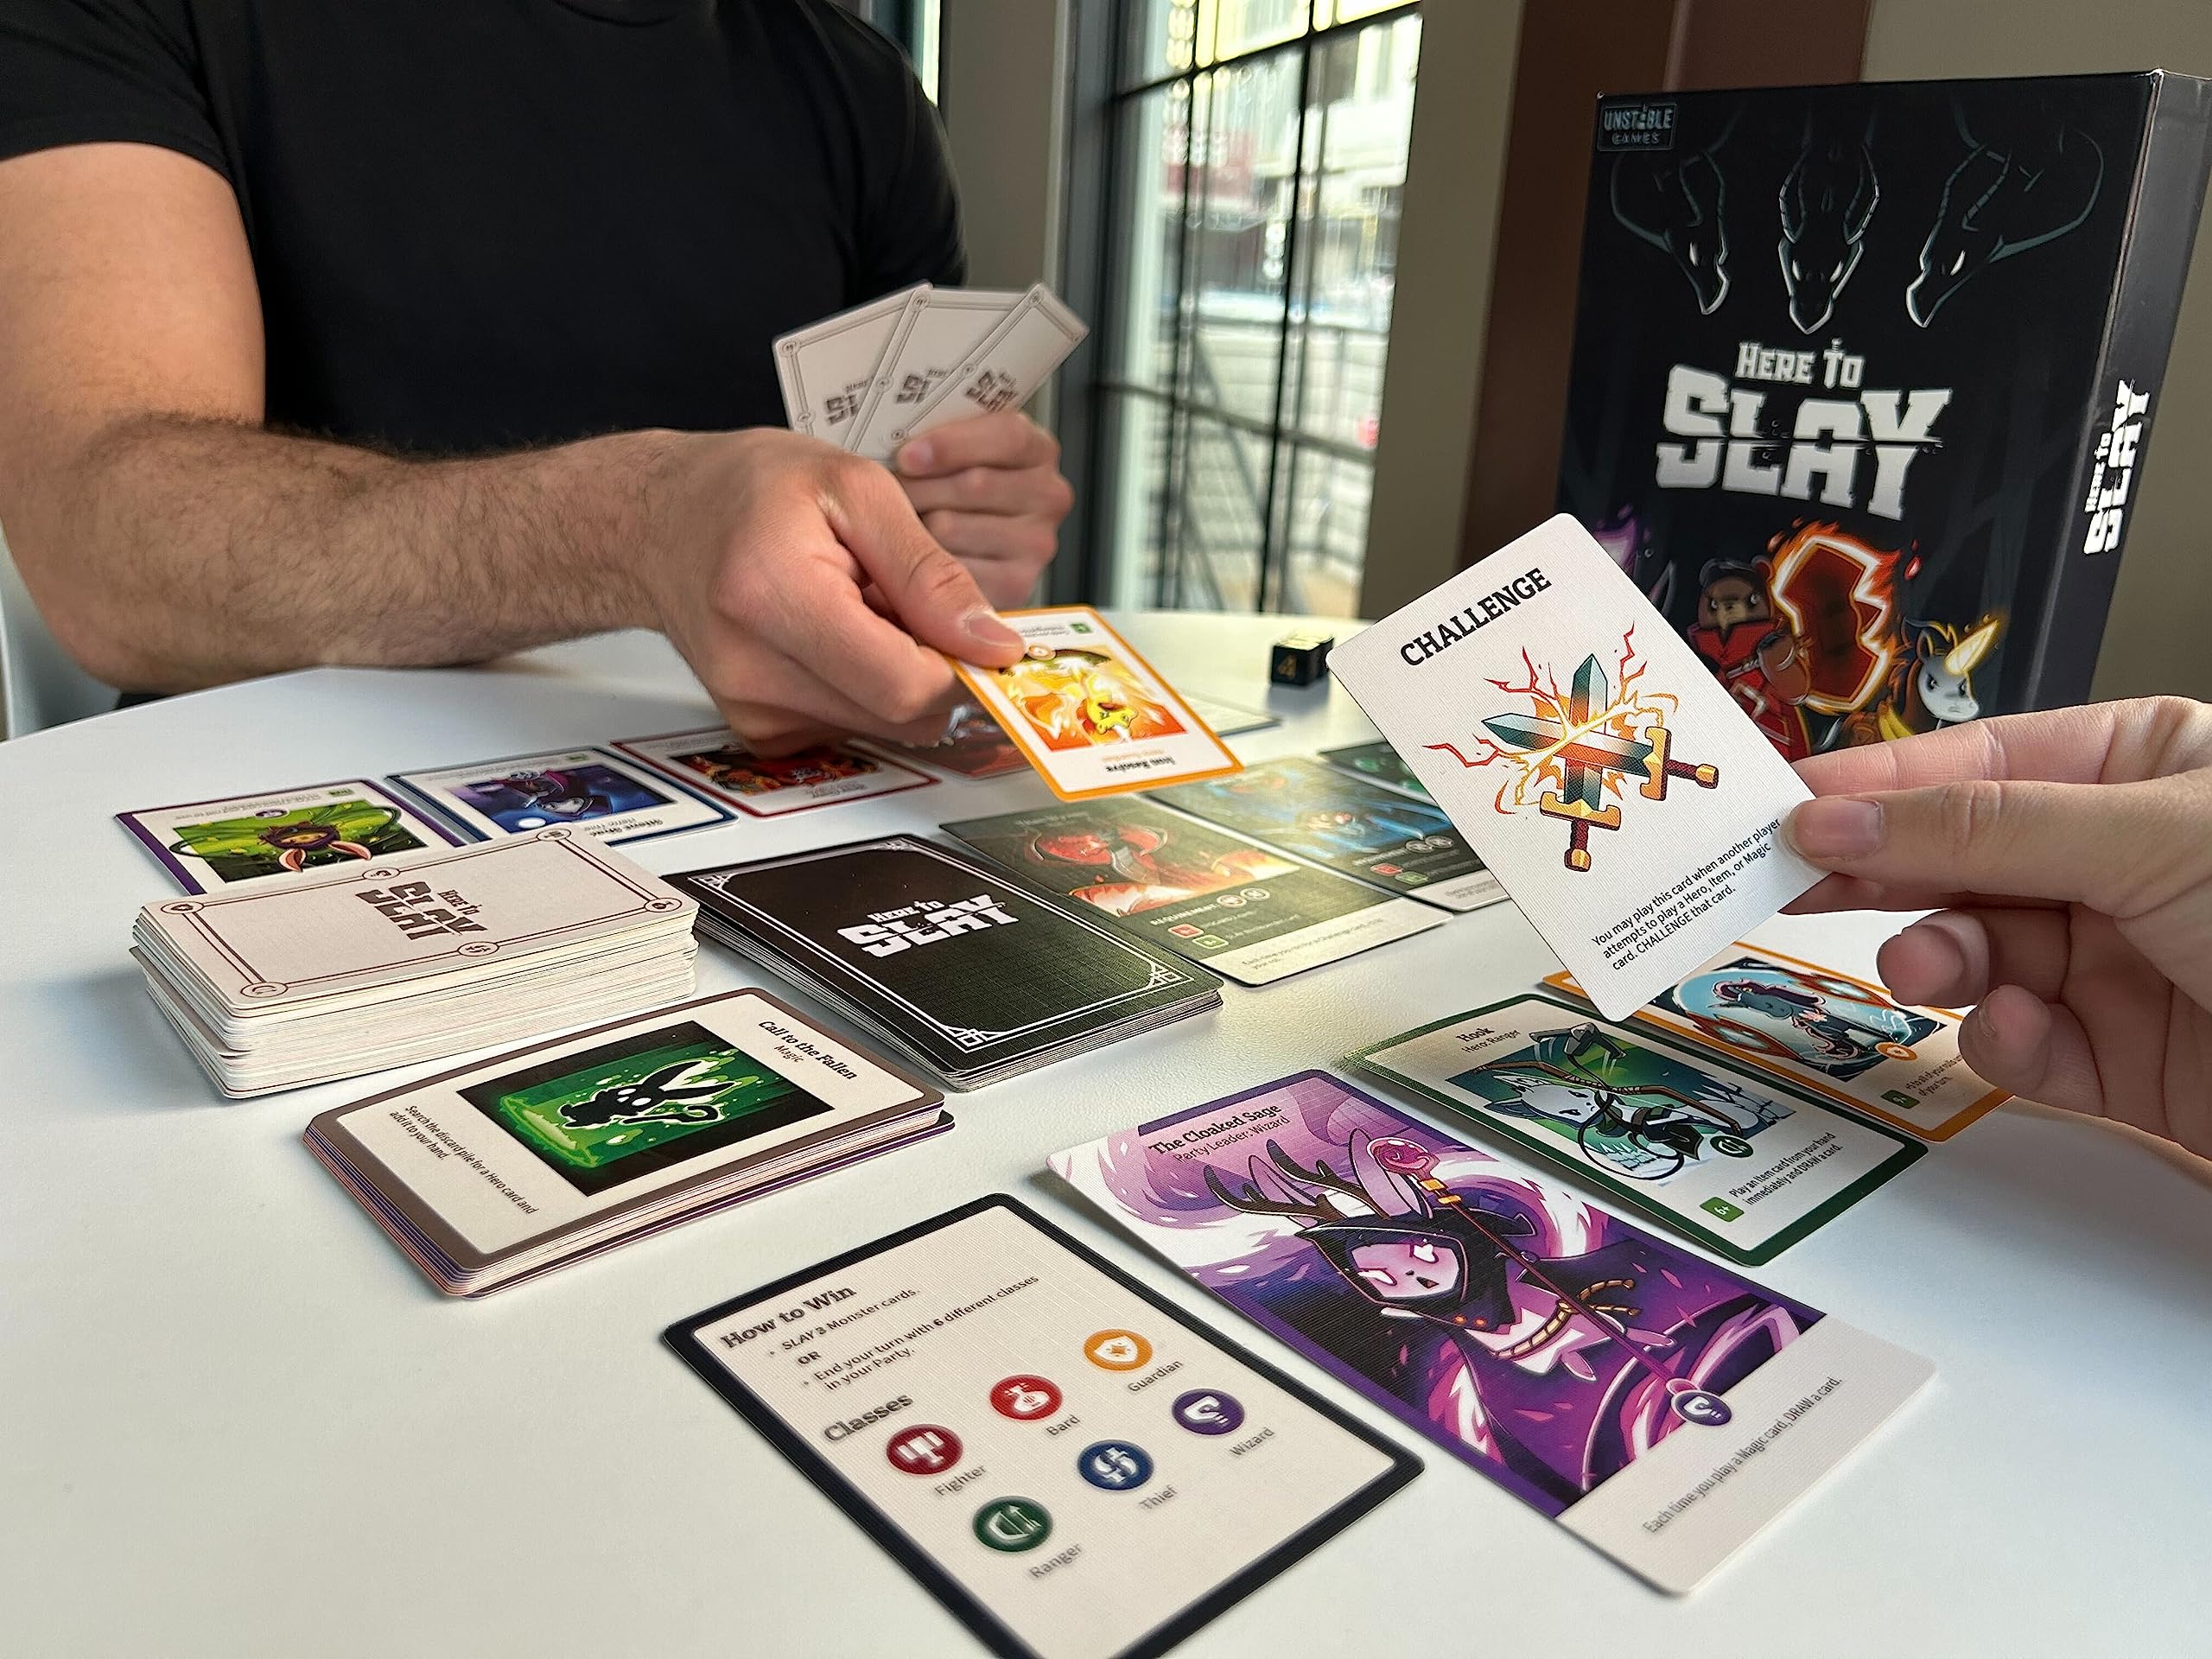 Unstable Games - Here to Slay Base Game - Strategic role playing card game for kids, teens, & adults - 2-6 players ages 10+ - Brutal and adorable adventure- Great for family game night